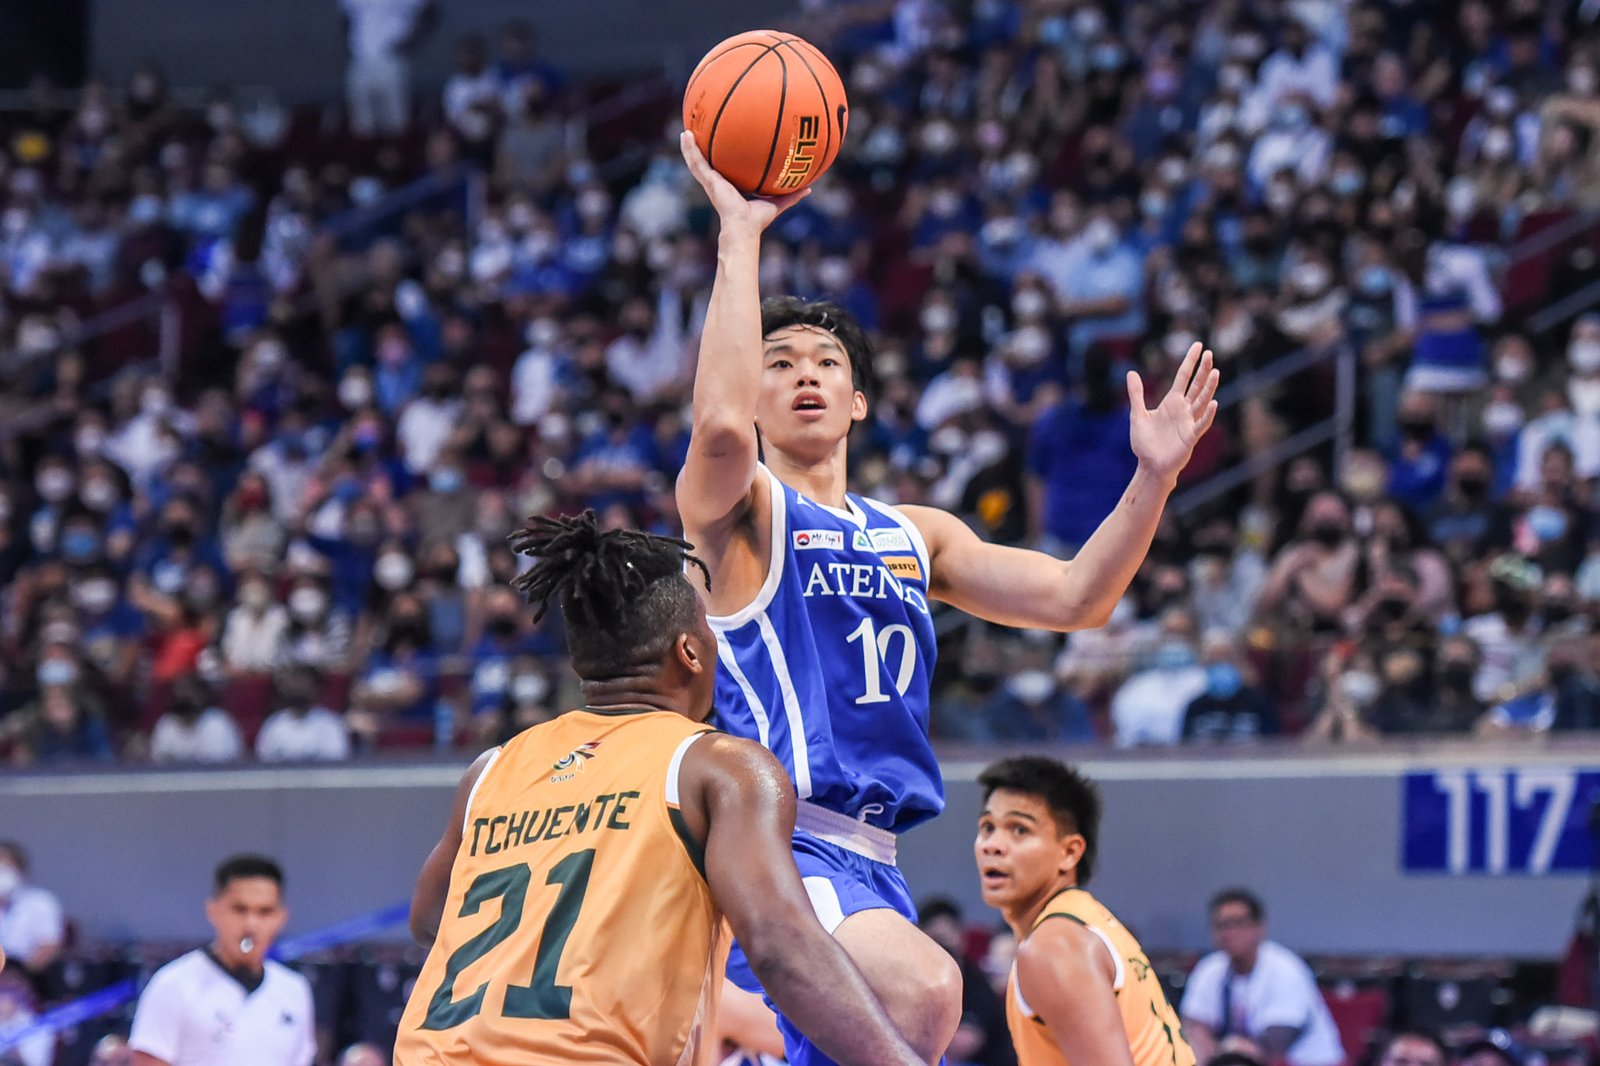 Dave Ildefonso of the Ateneo Blue Eagles. [UAAP photo]